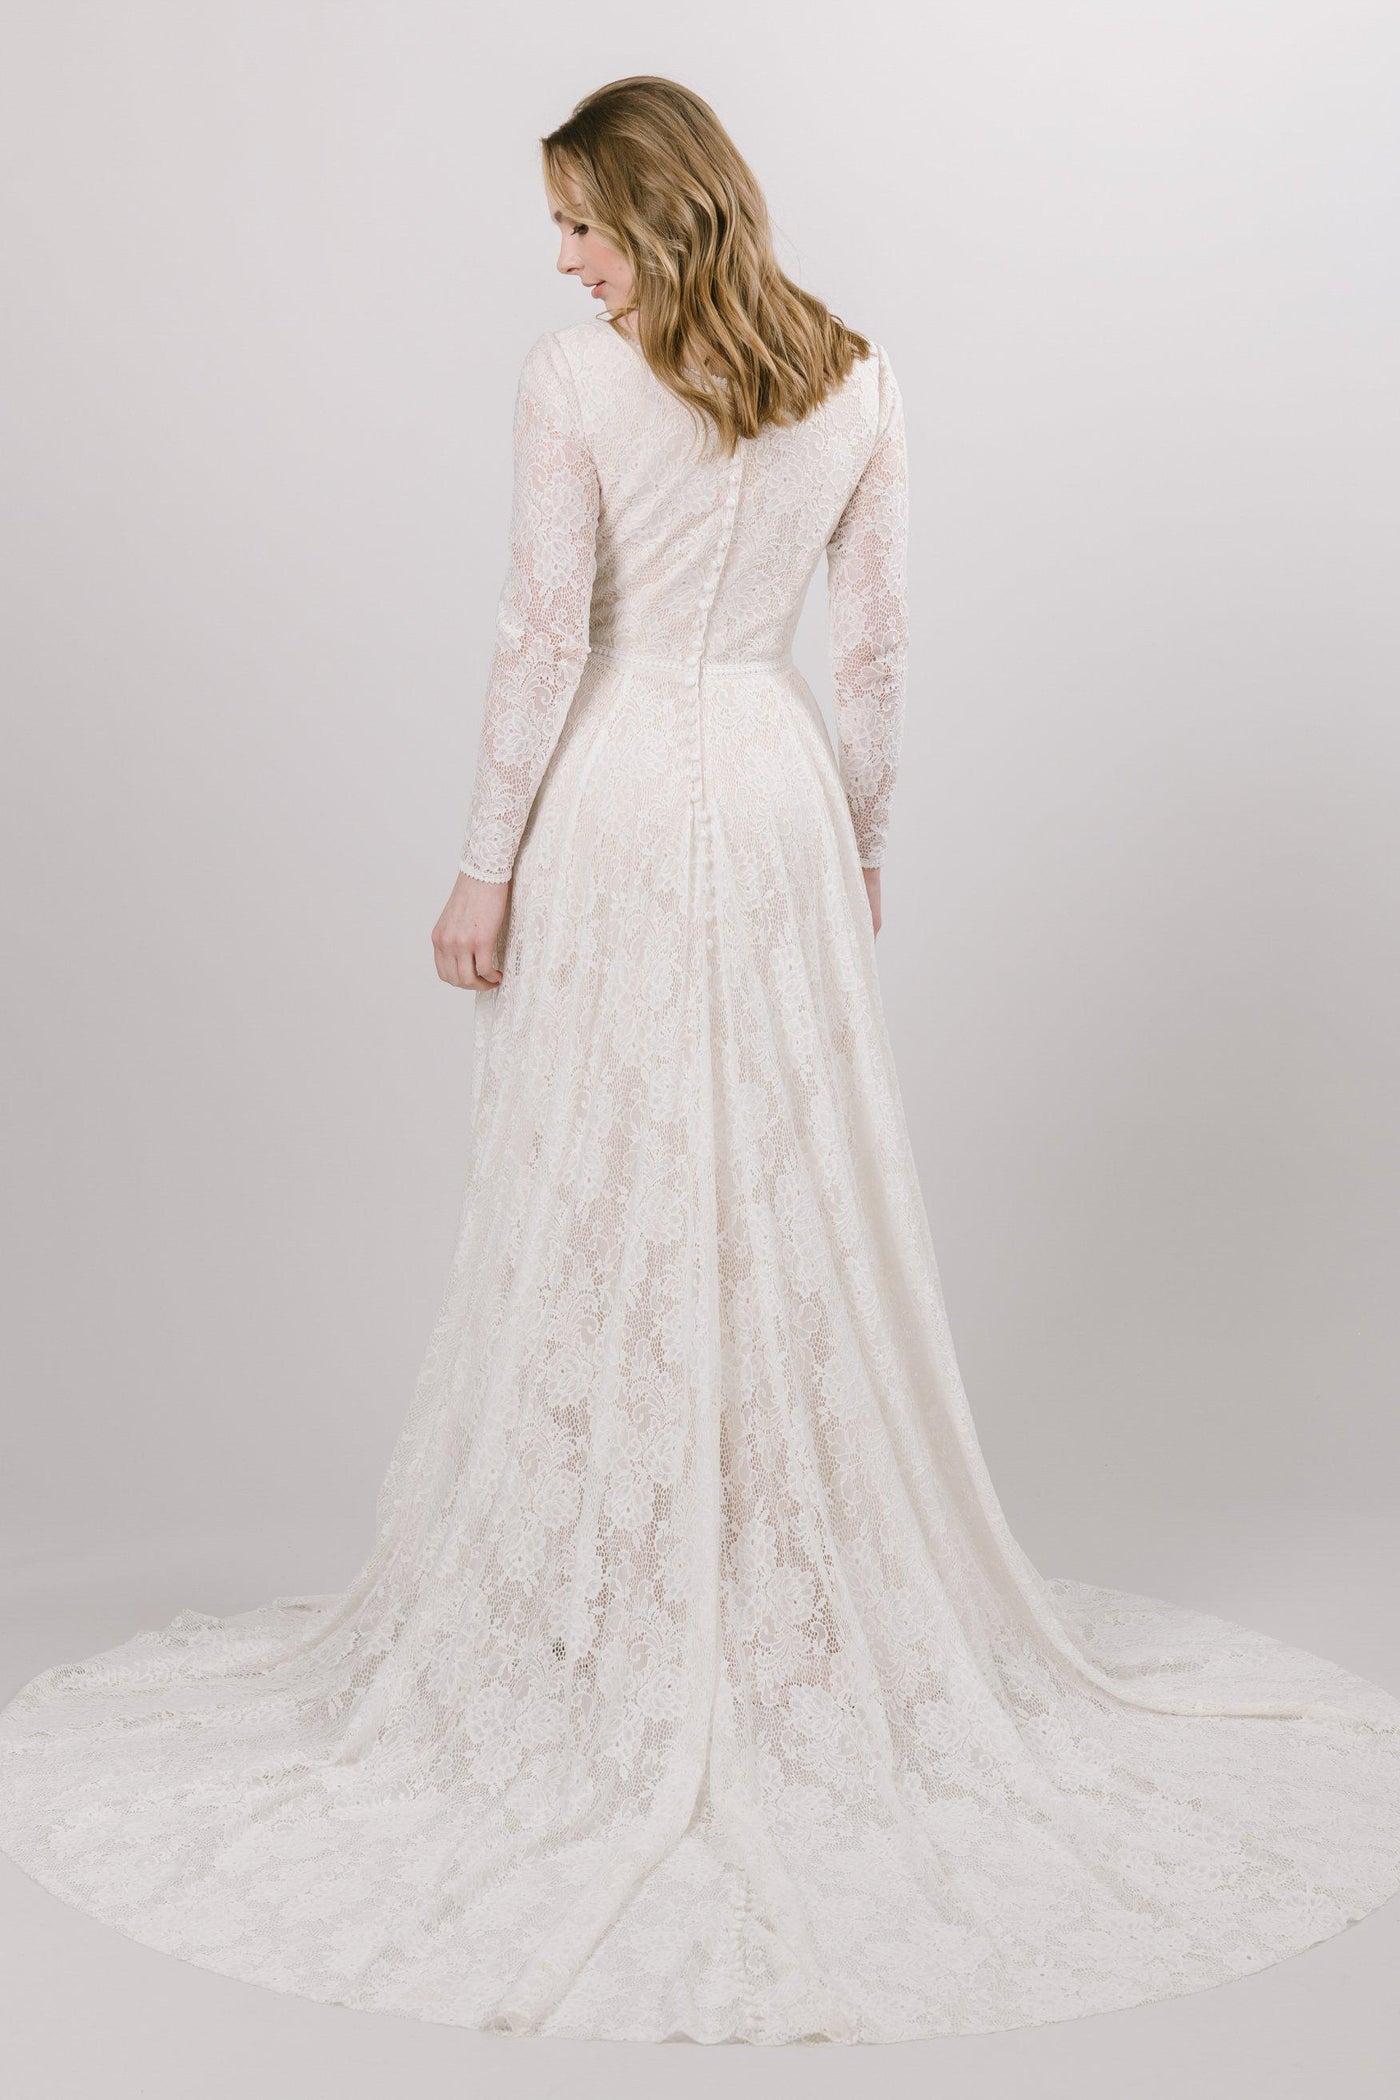 Modest Lace wedding dress with long, illusion laced sleeves from bridal shop in Salt lake city utah